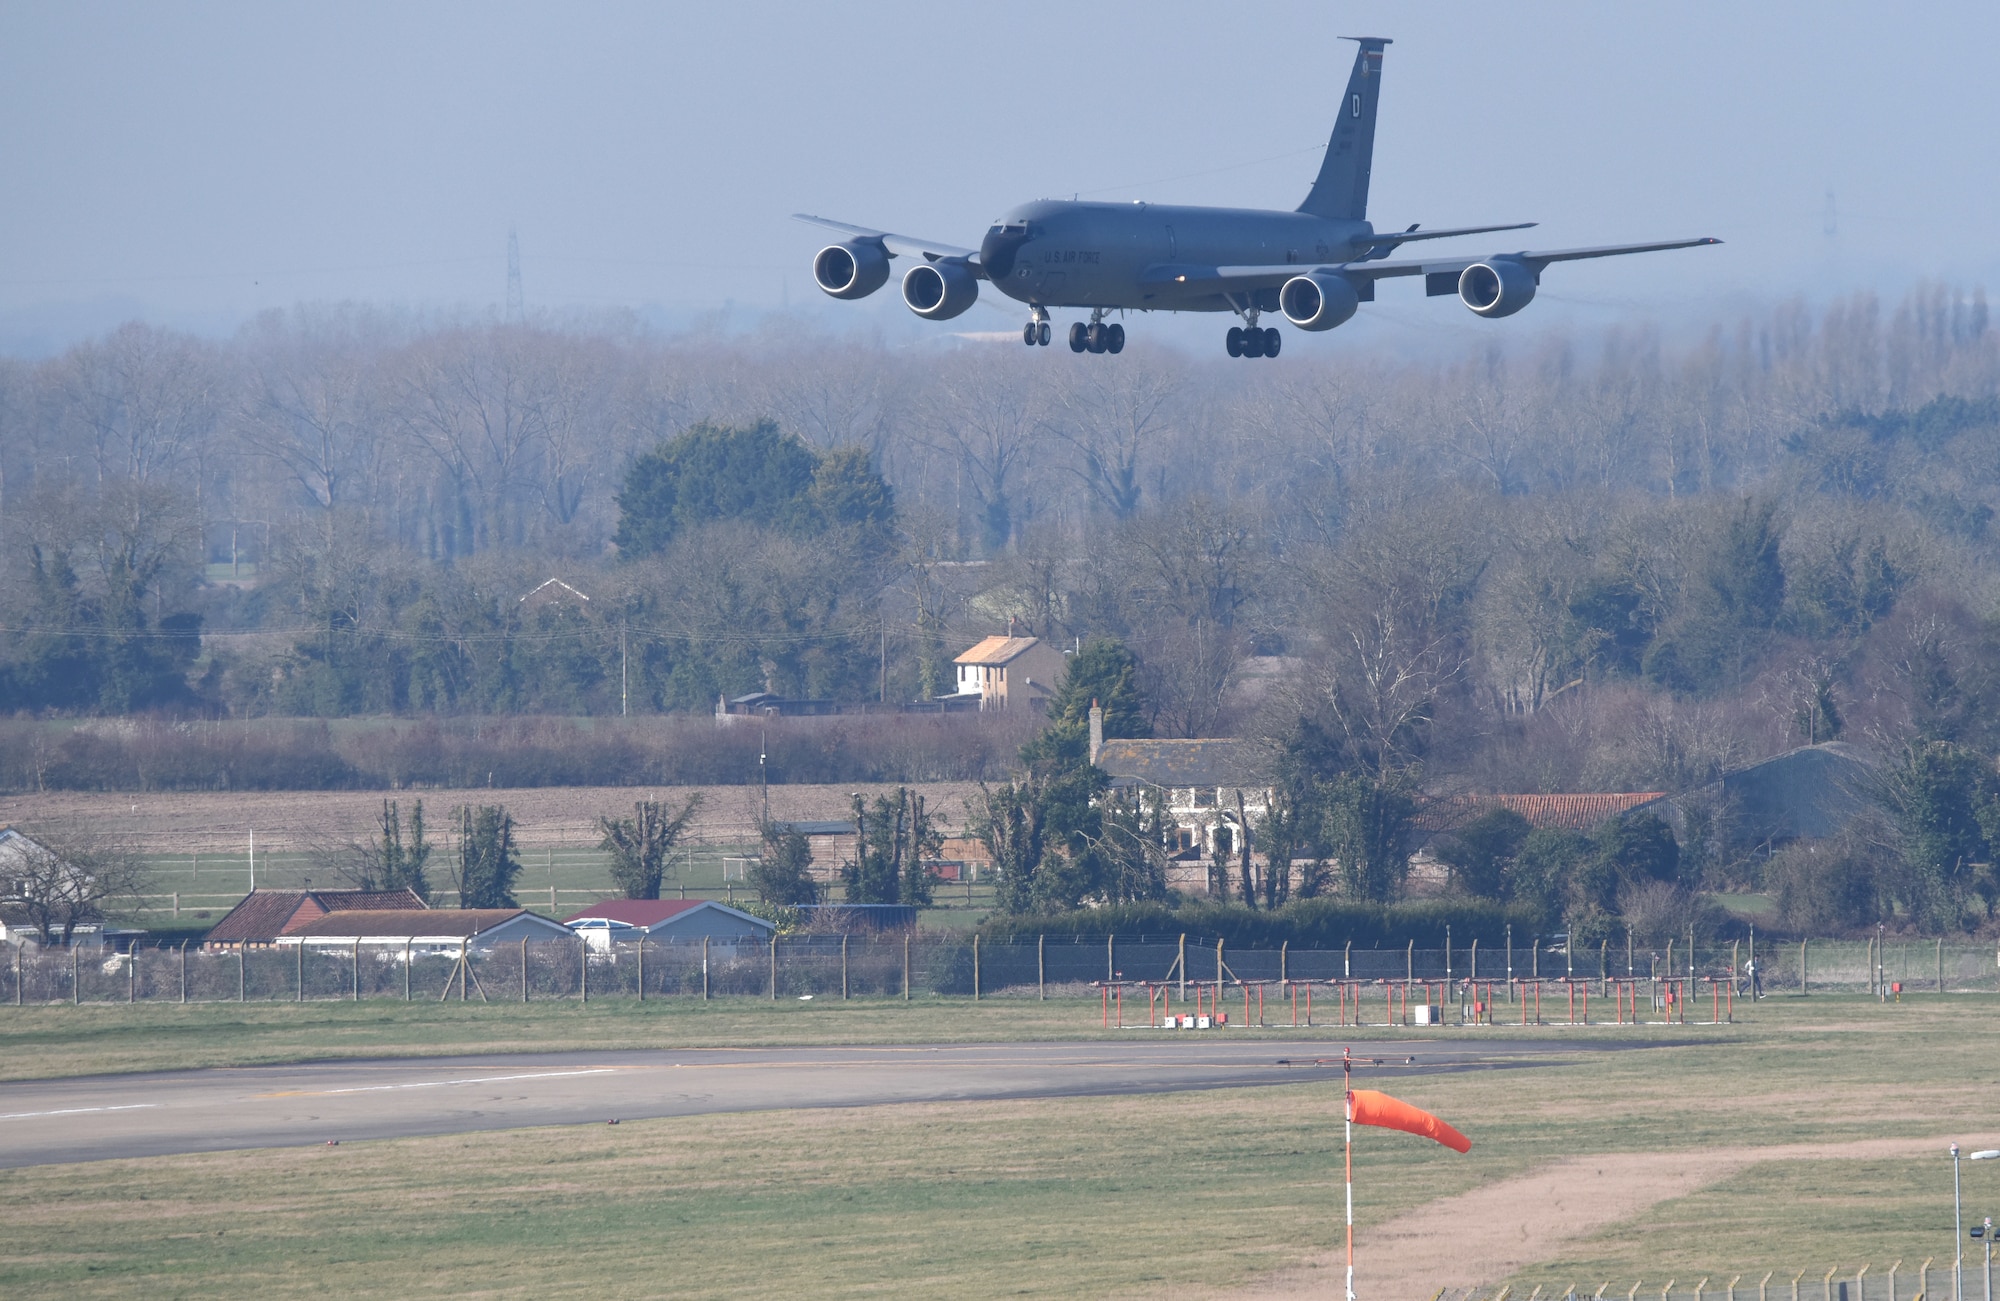 A U.S. Air Force KC-135 Stratotanker assigned to the 100th Air Refueling Wing lands at Royal Air Force Mildenhall, England, March 10, 2022. The 100th ARW is the only permanent U.S. air refueling wing in the European theater that provides critical air refueling support that allows the Expeditionary Air Force to deploy around the globe at a moment’s notice. (U.S. Air Force photo by Karen Abeyasekere)